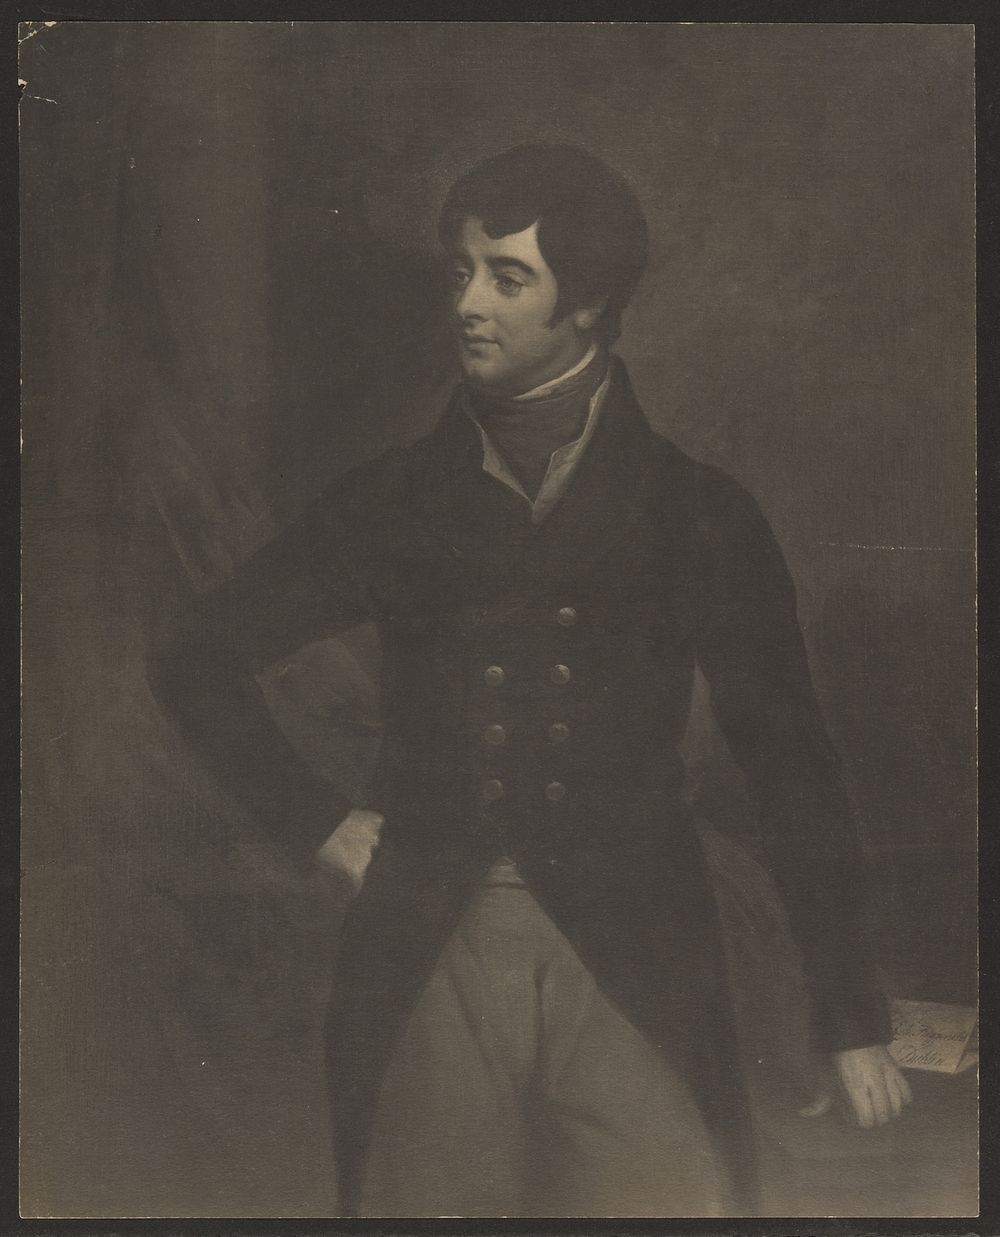 Lord Edward Fitzgerald by H.D. Hamilton by Frederick H Hollyer